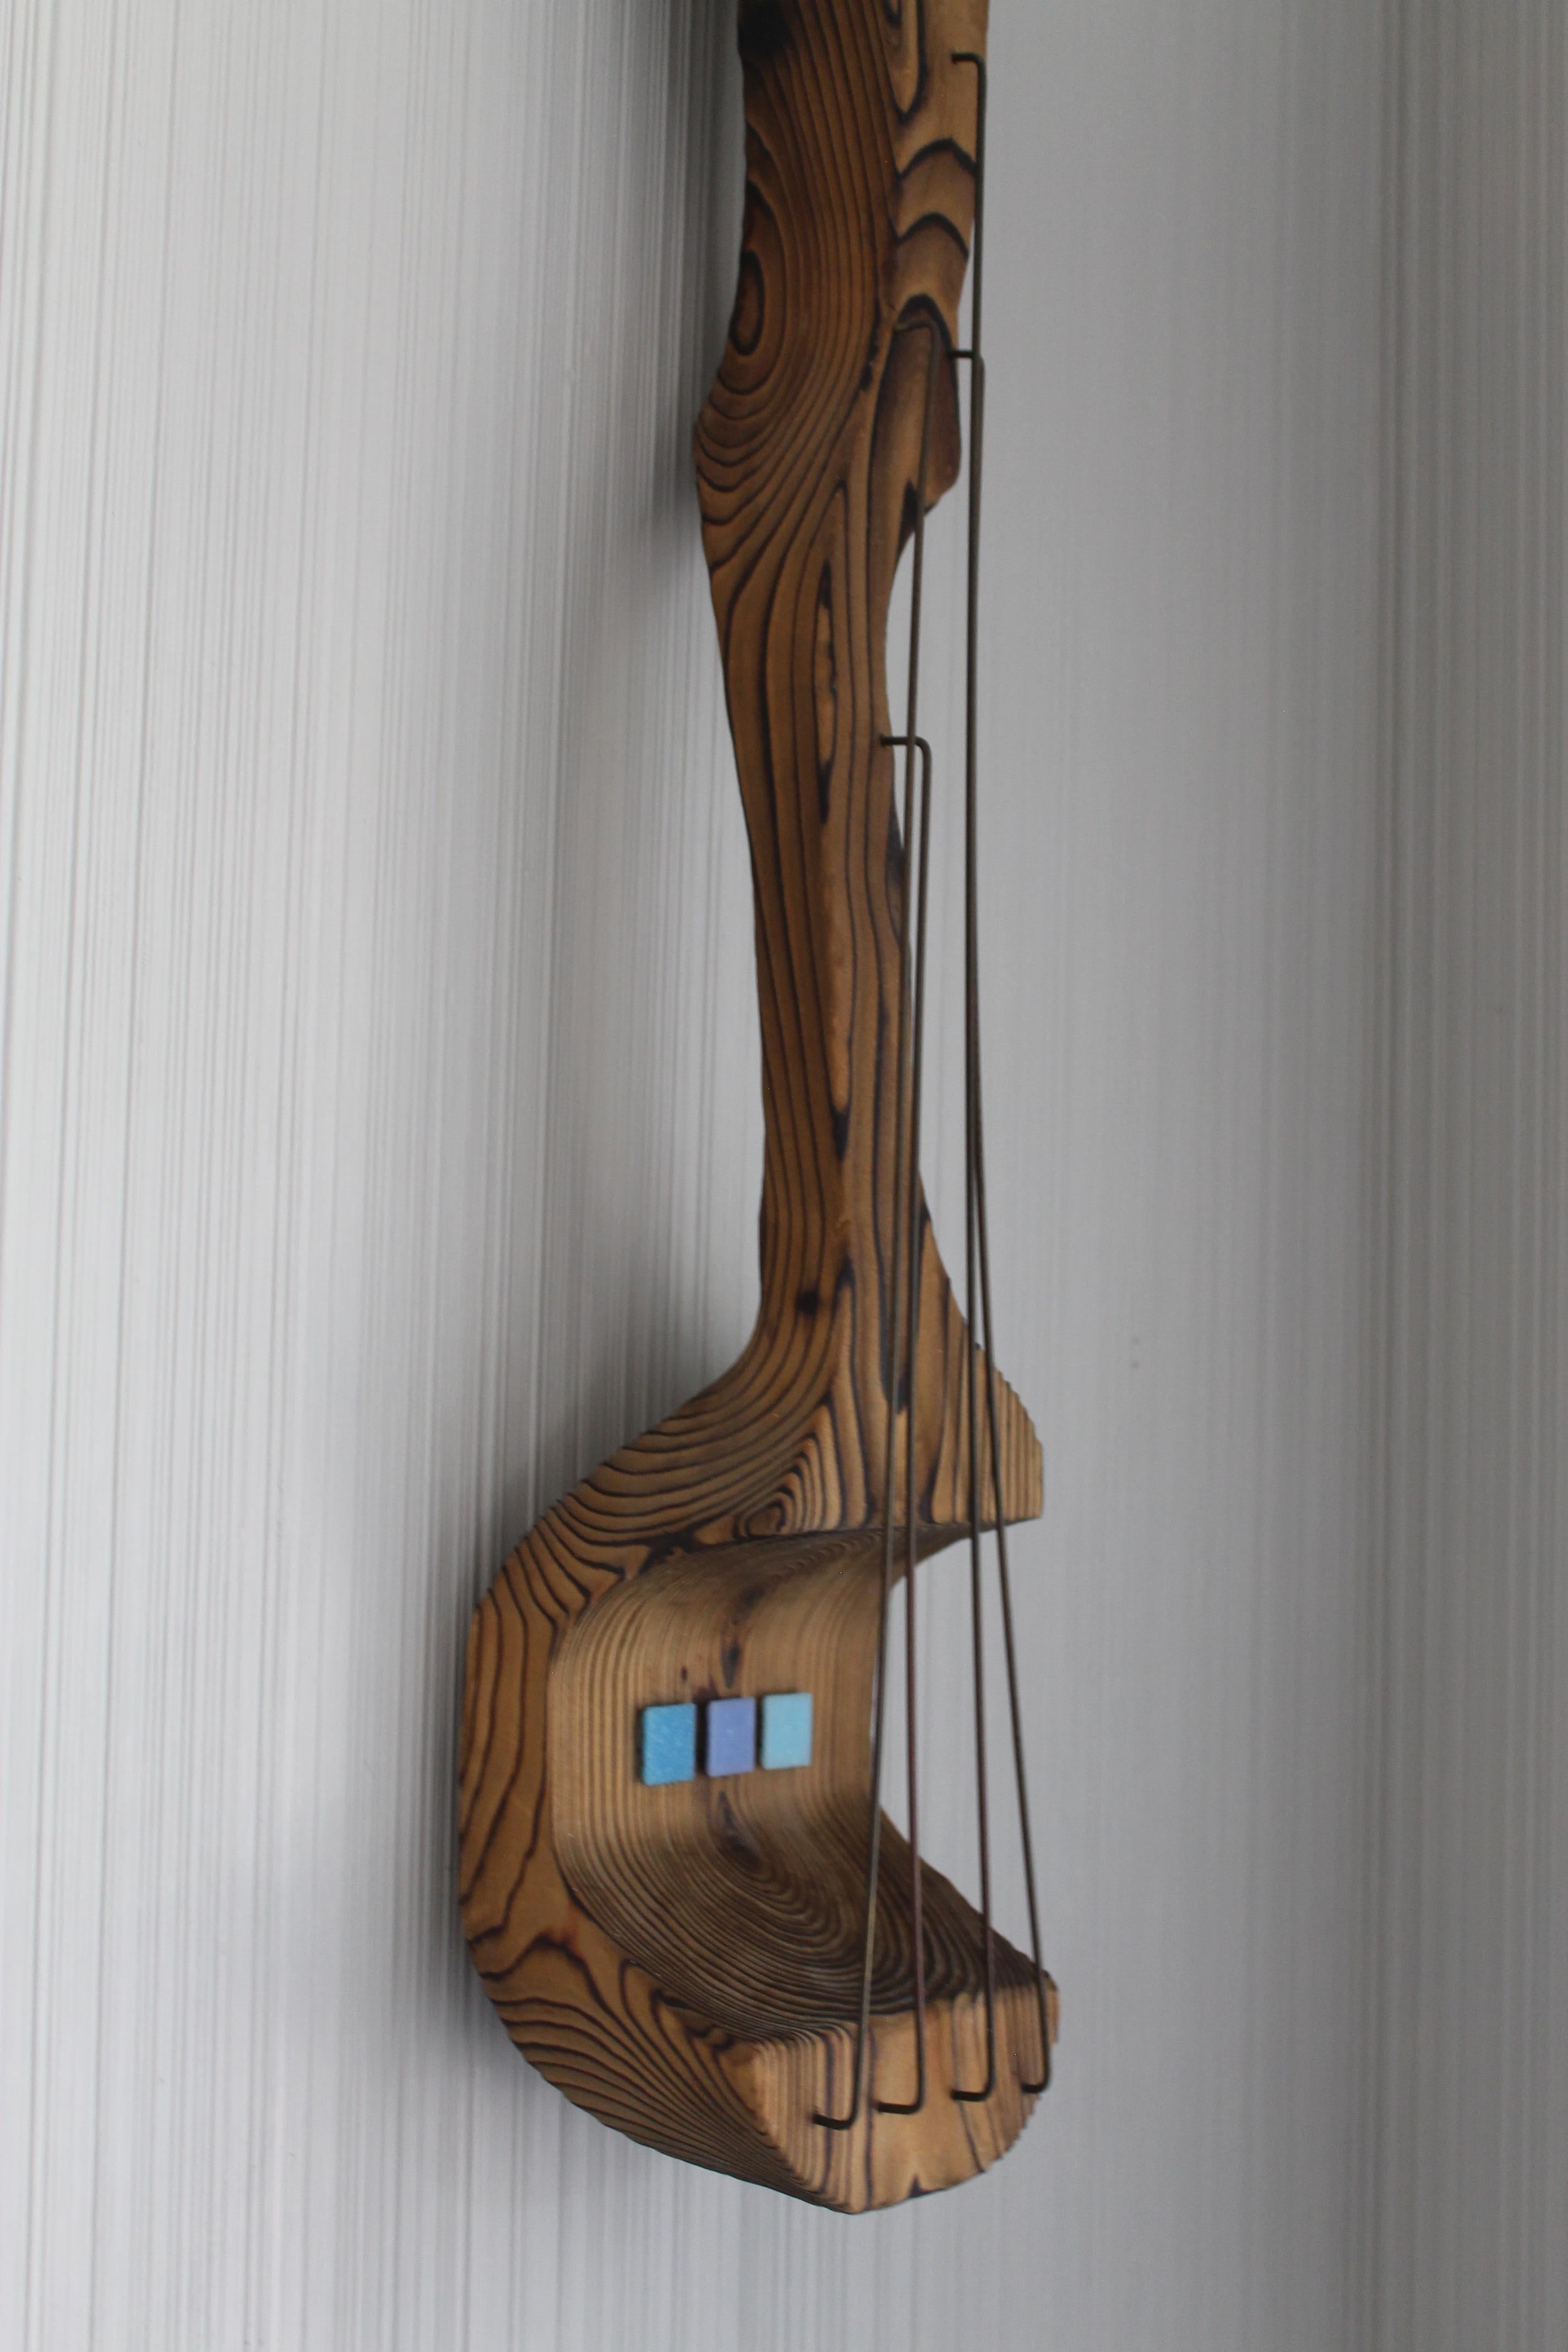 Witco wooden Tiki bar wall sculpture with brass wire strings and glass tiles. Guitar measures 29.5